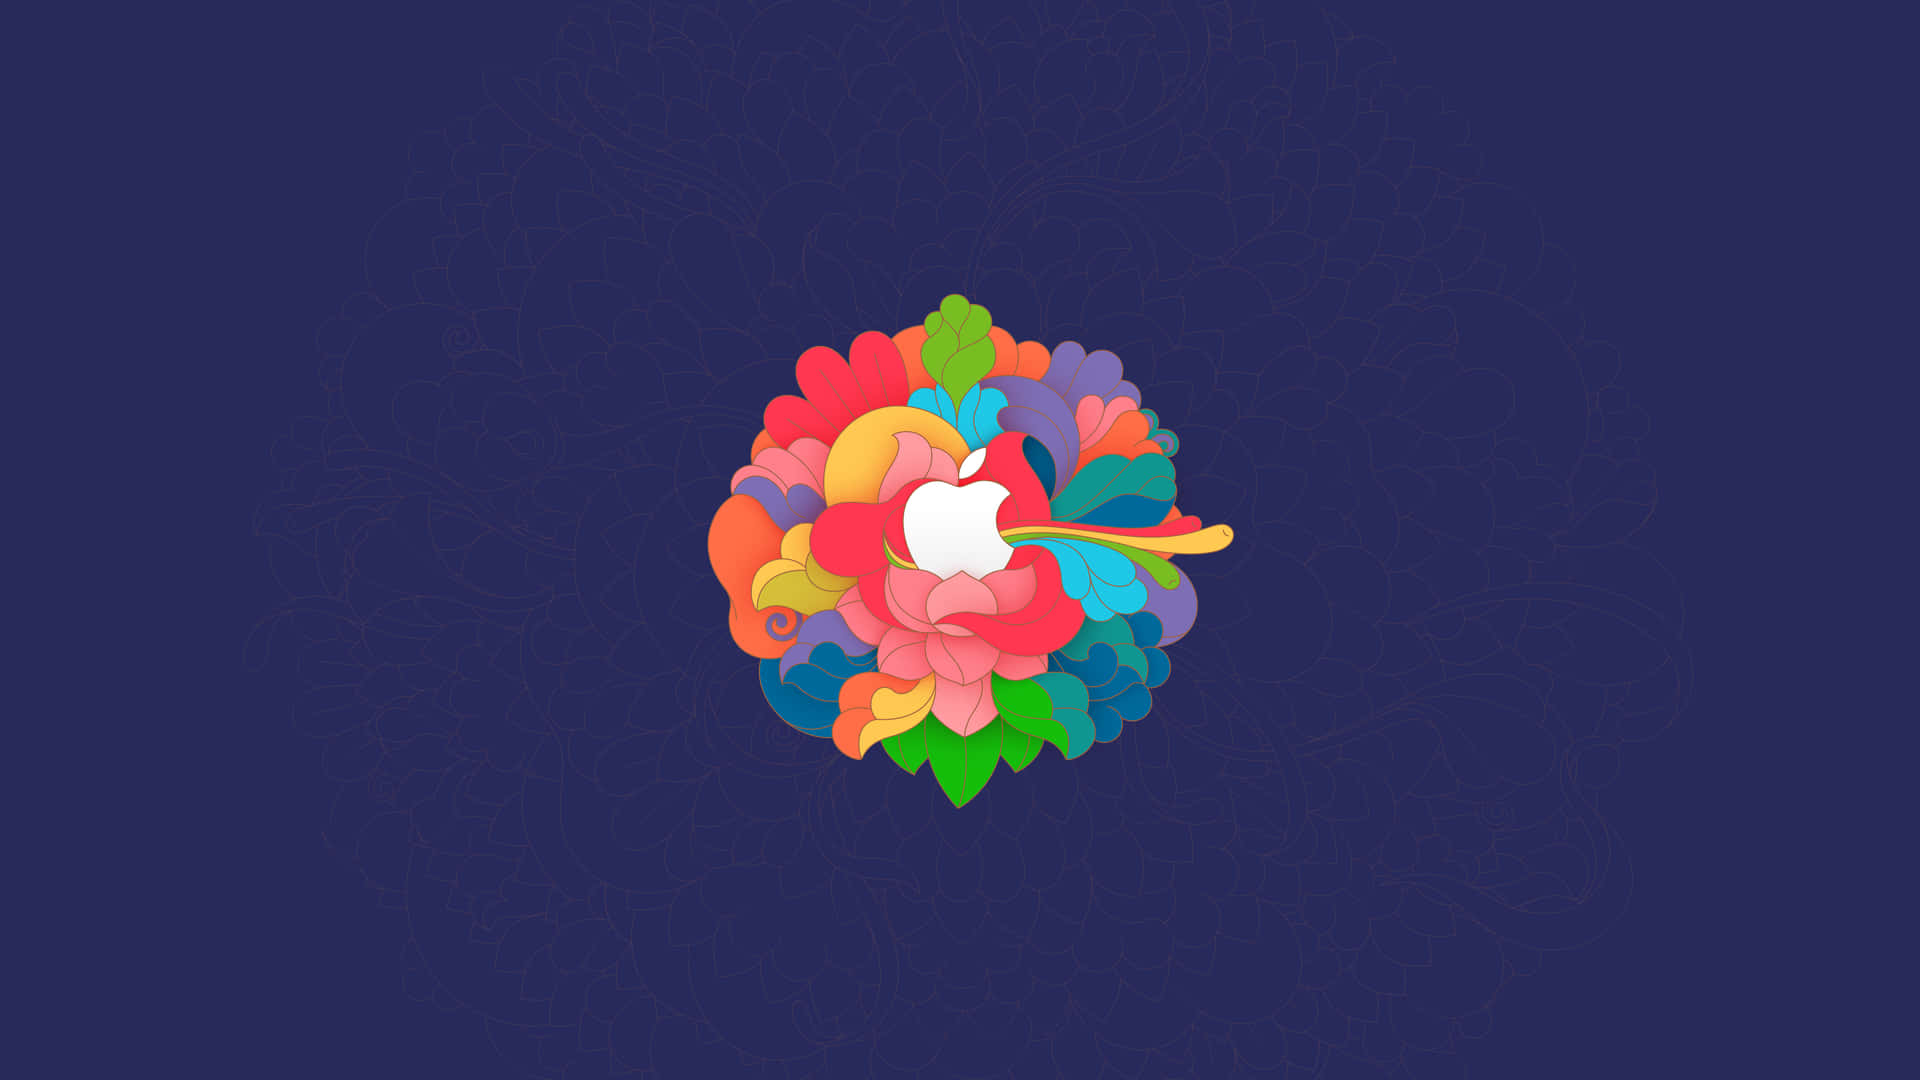 Apple Logo With Colorful Flowers In The Background Background